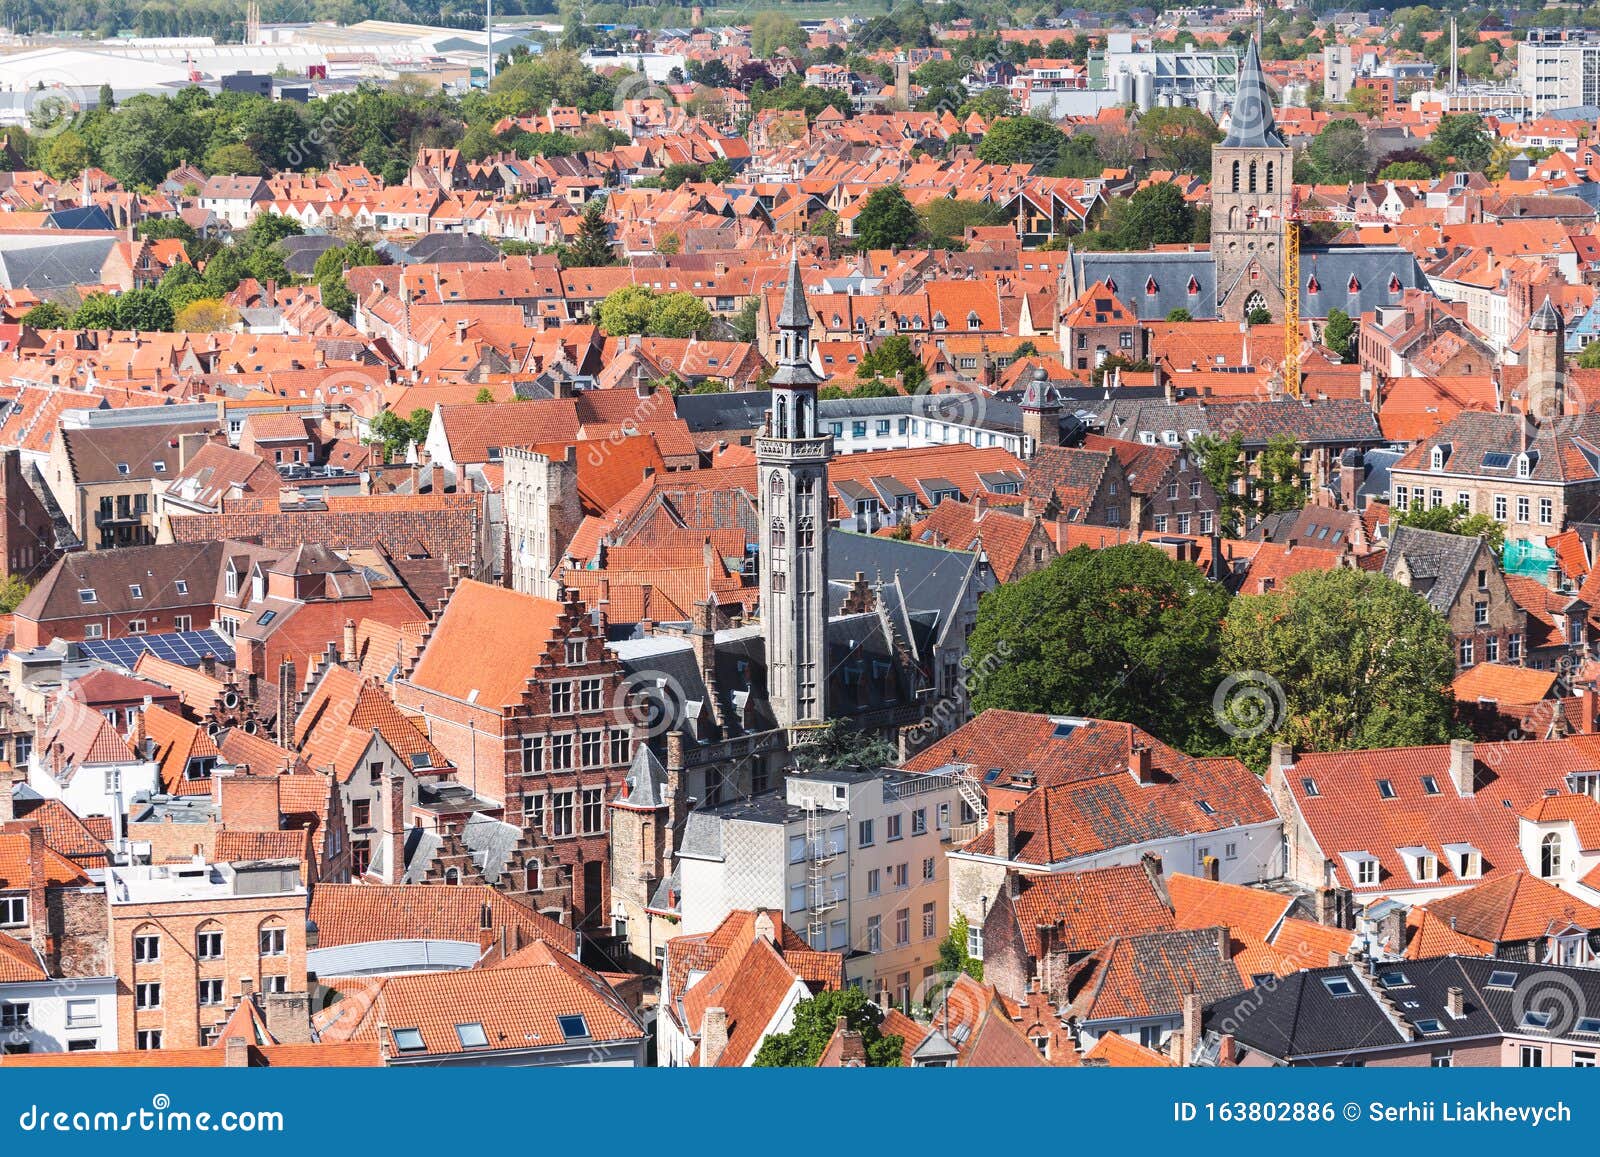 Panoramic Aerial View Of The Old City Of Bruges, Belgium ...